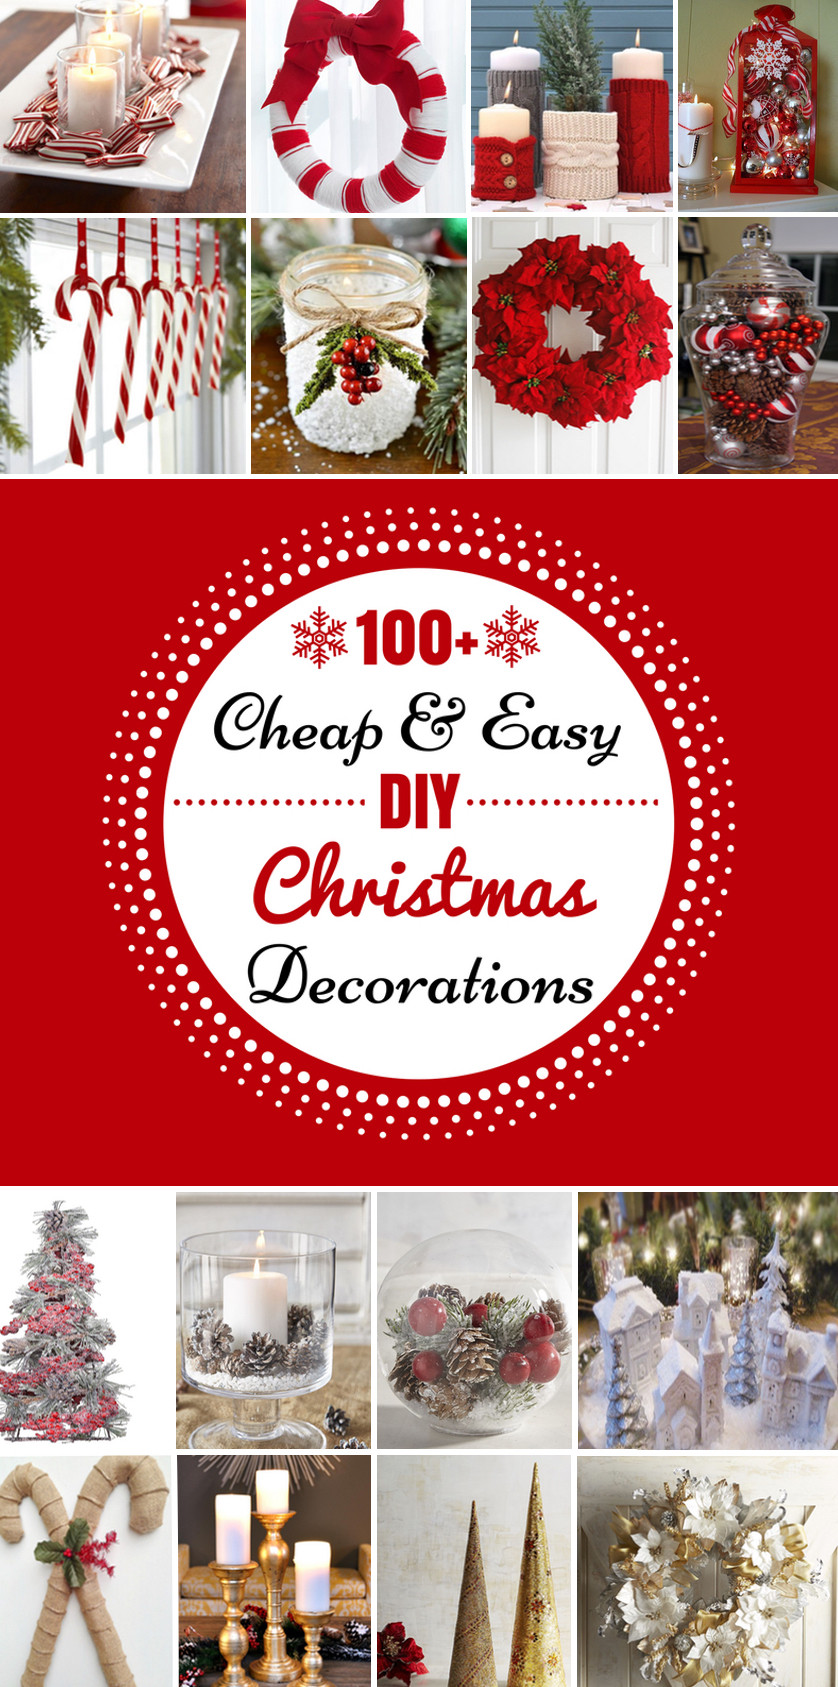 Christmas DIY Decorations
 100 Cheap & Easy DIY Christmas Decorations Prudent Penny